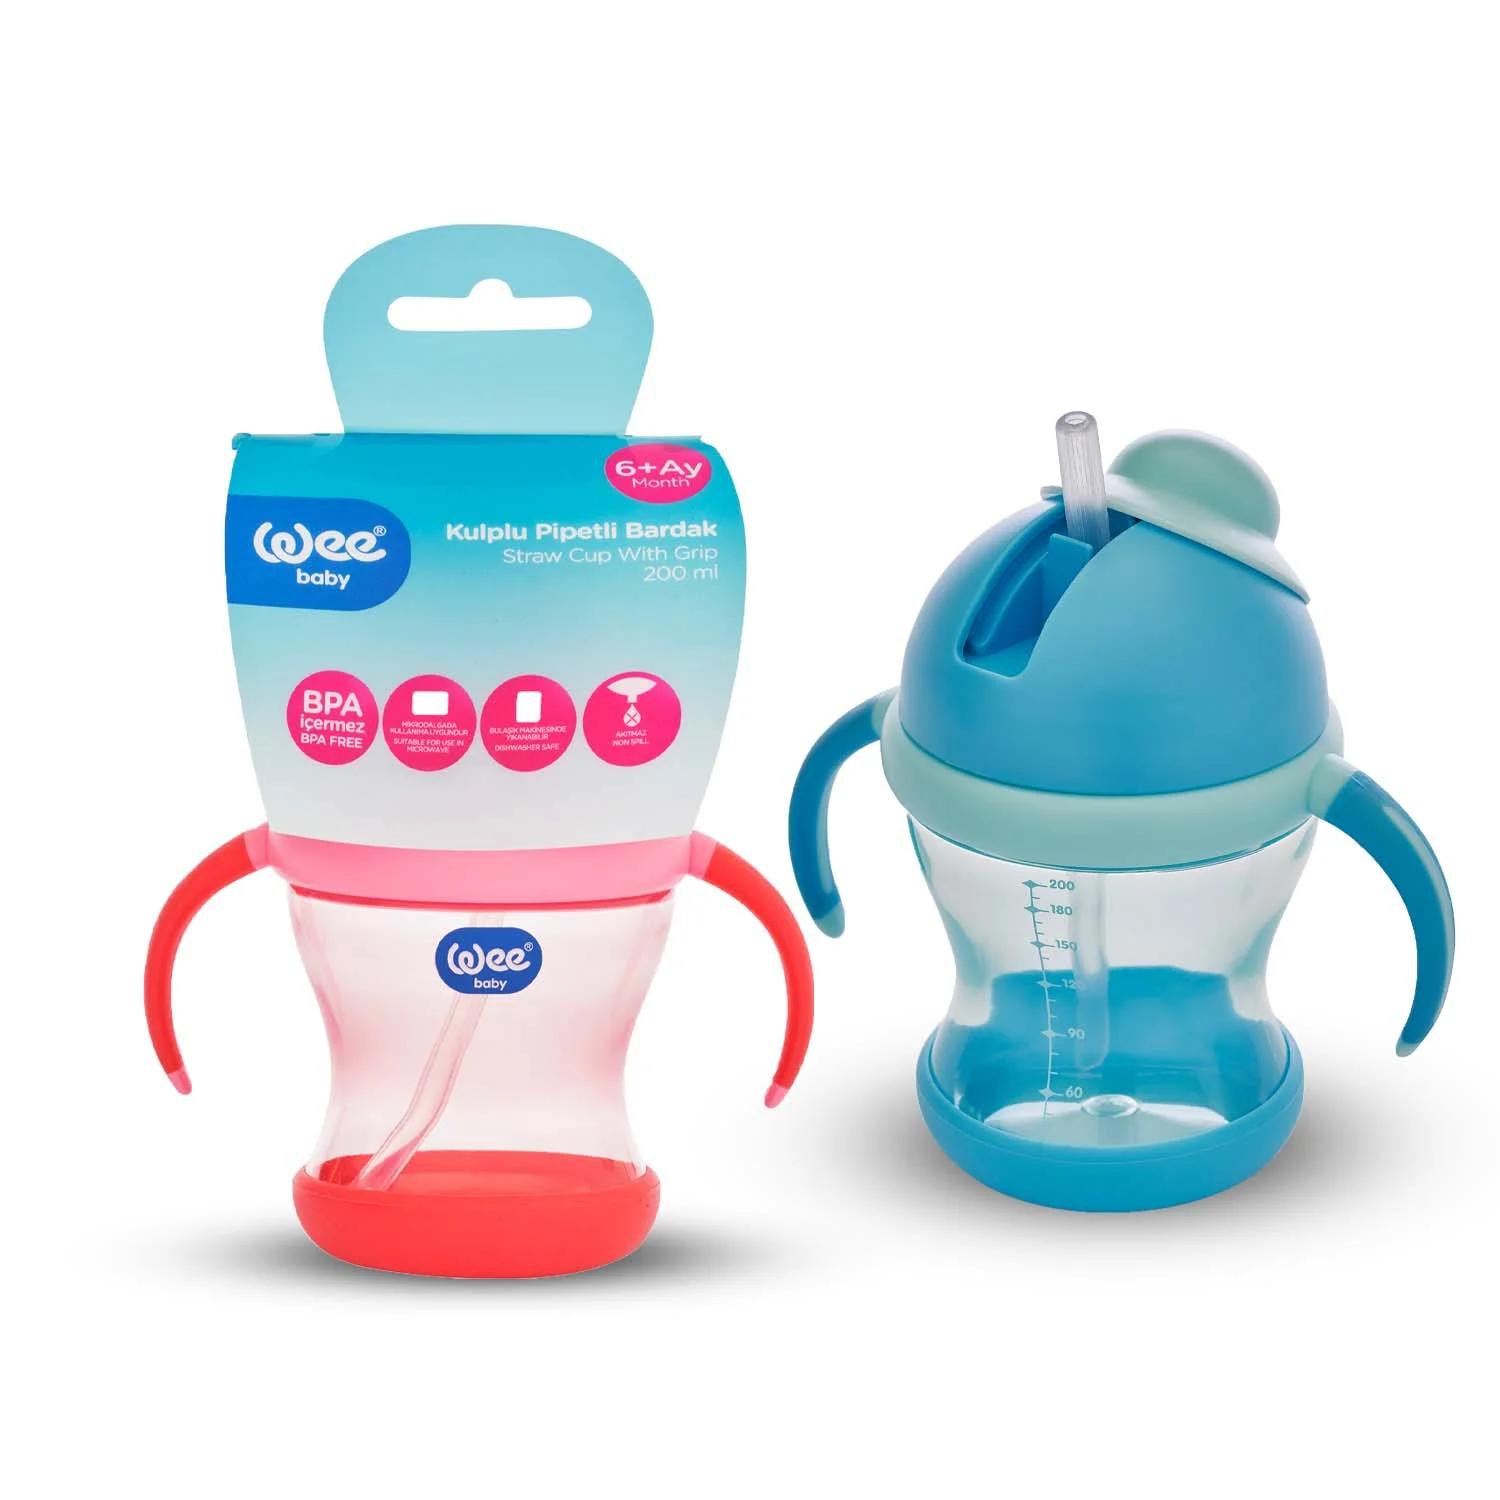 Wee Baby Straw Cup With Grip 200 ML